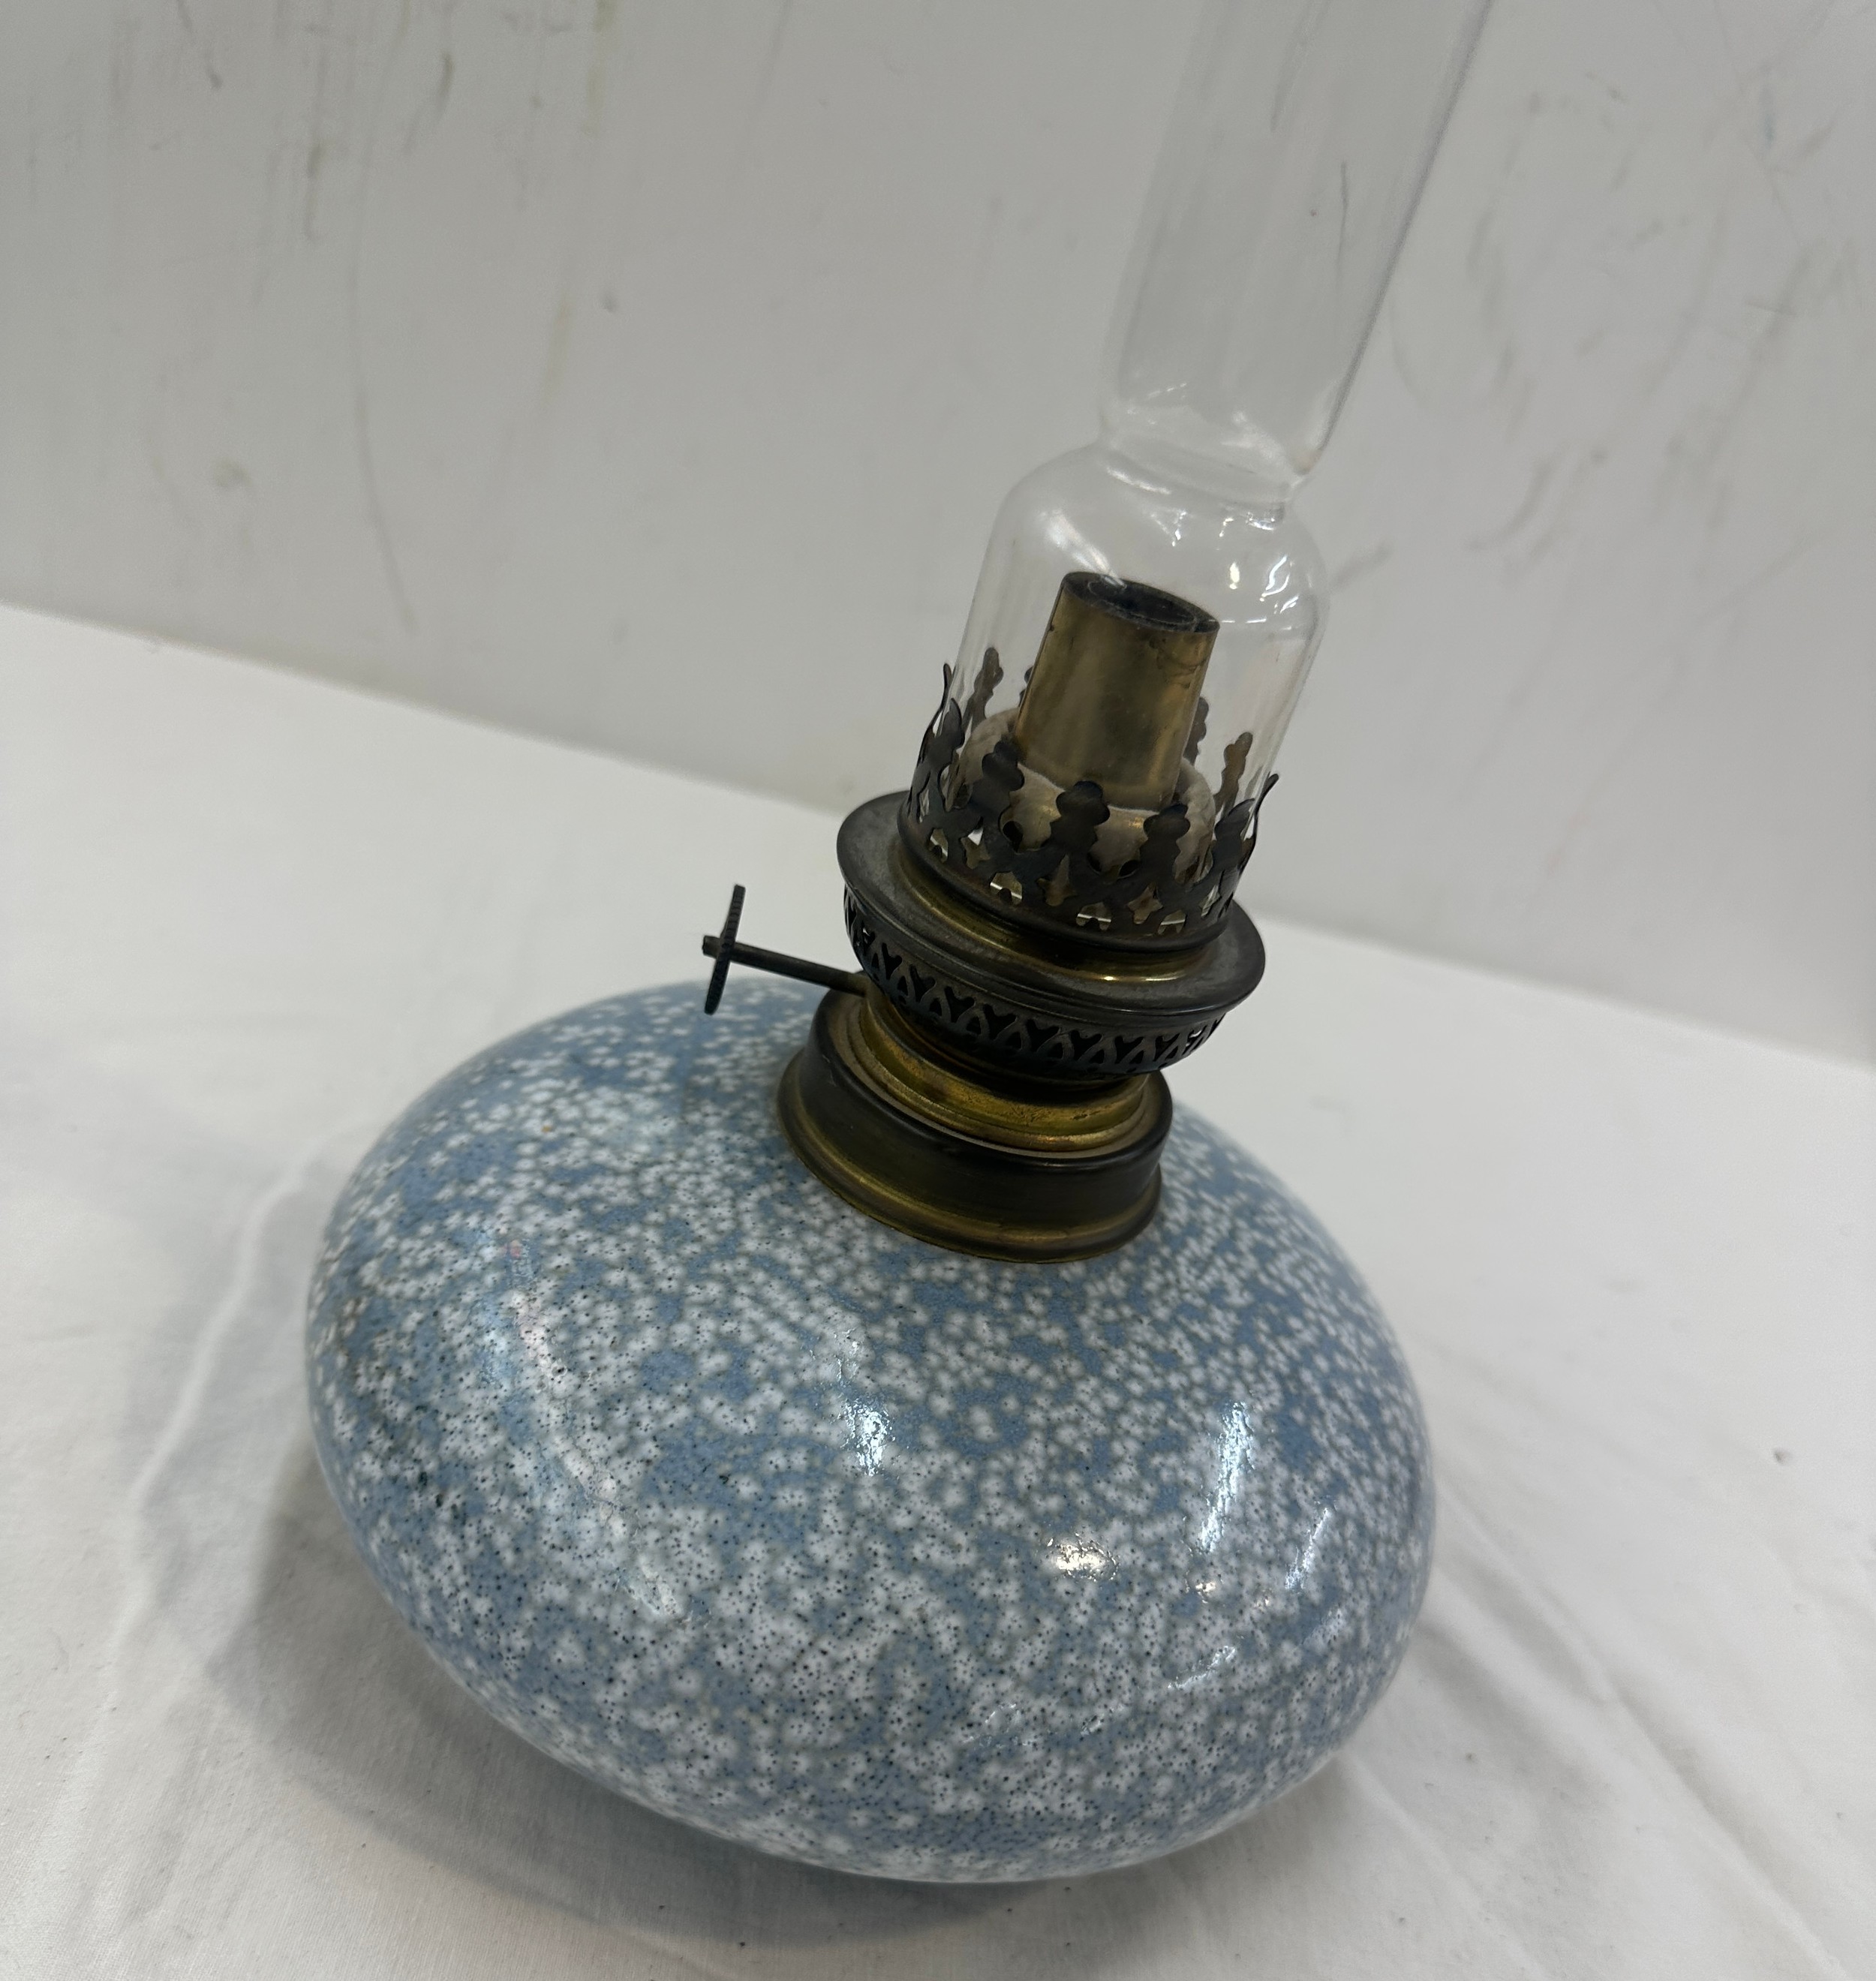 Vintage oil lamp and funnel, height including funnel 17 inches tall - Bild 2 aus 4